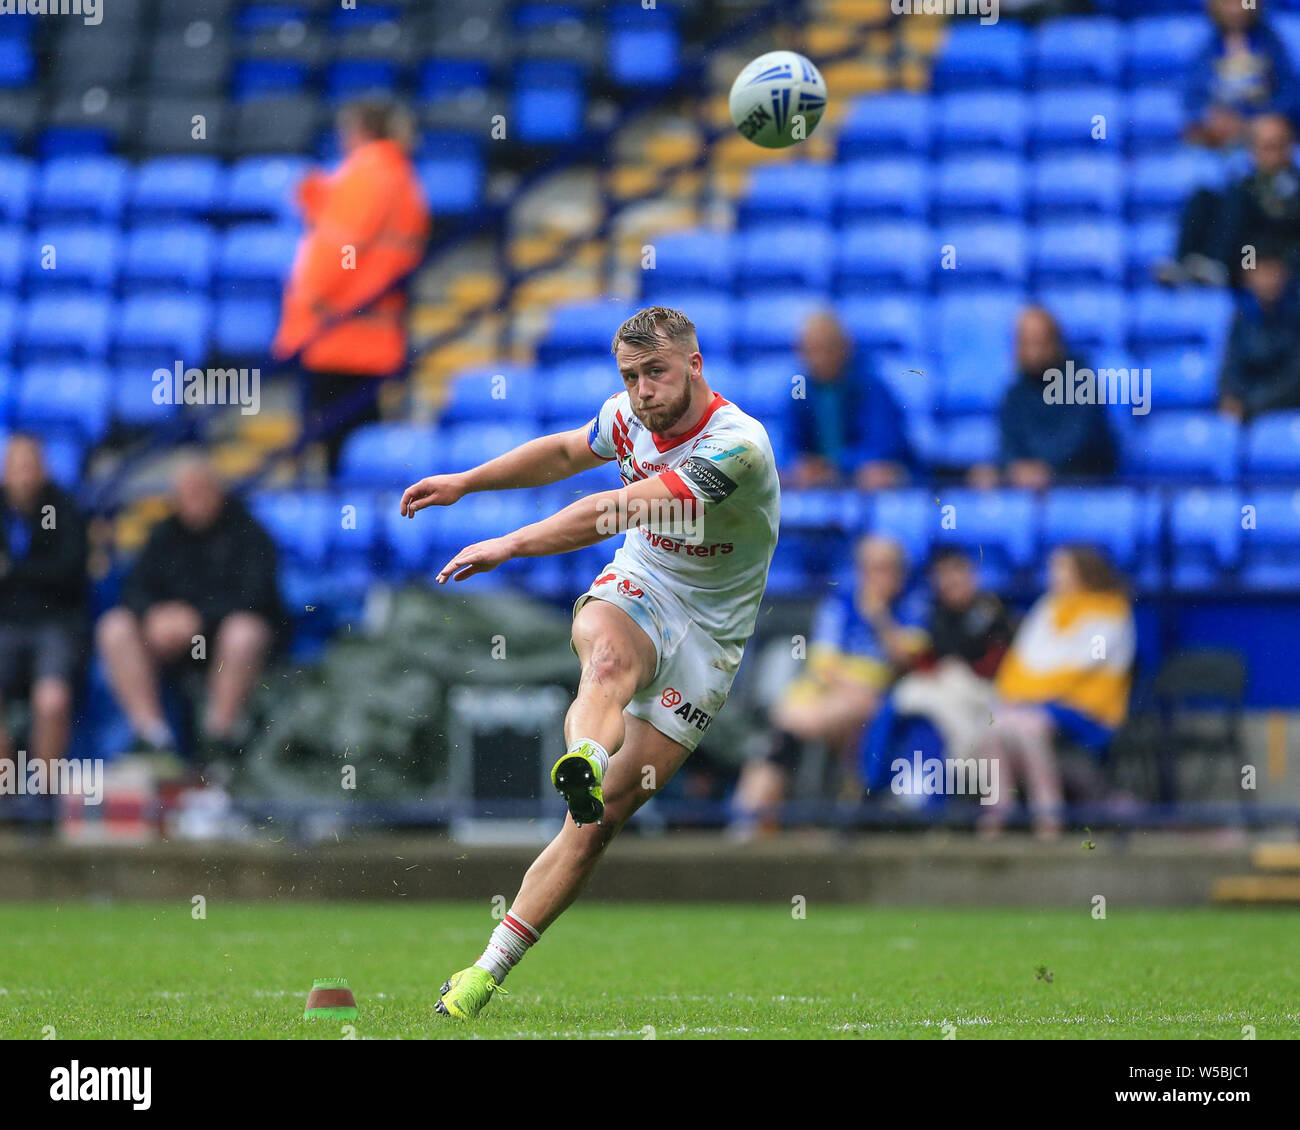 Bolton, UK. 27th July, 2019. 27th July 2019, University of Bolton Stadium, Bolton, England; 2019 Coral Challenge Cup Semi-Final, St Helens vs Halifax RLFC ; Danny Richardson (7) of St Helens converts Credit: Mark Cosgrove/News Images Credit: News Images /Alamy Live News Stock Photo